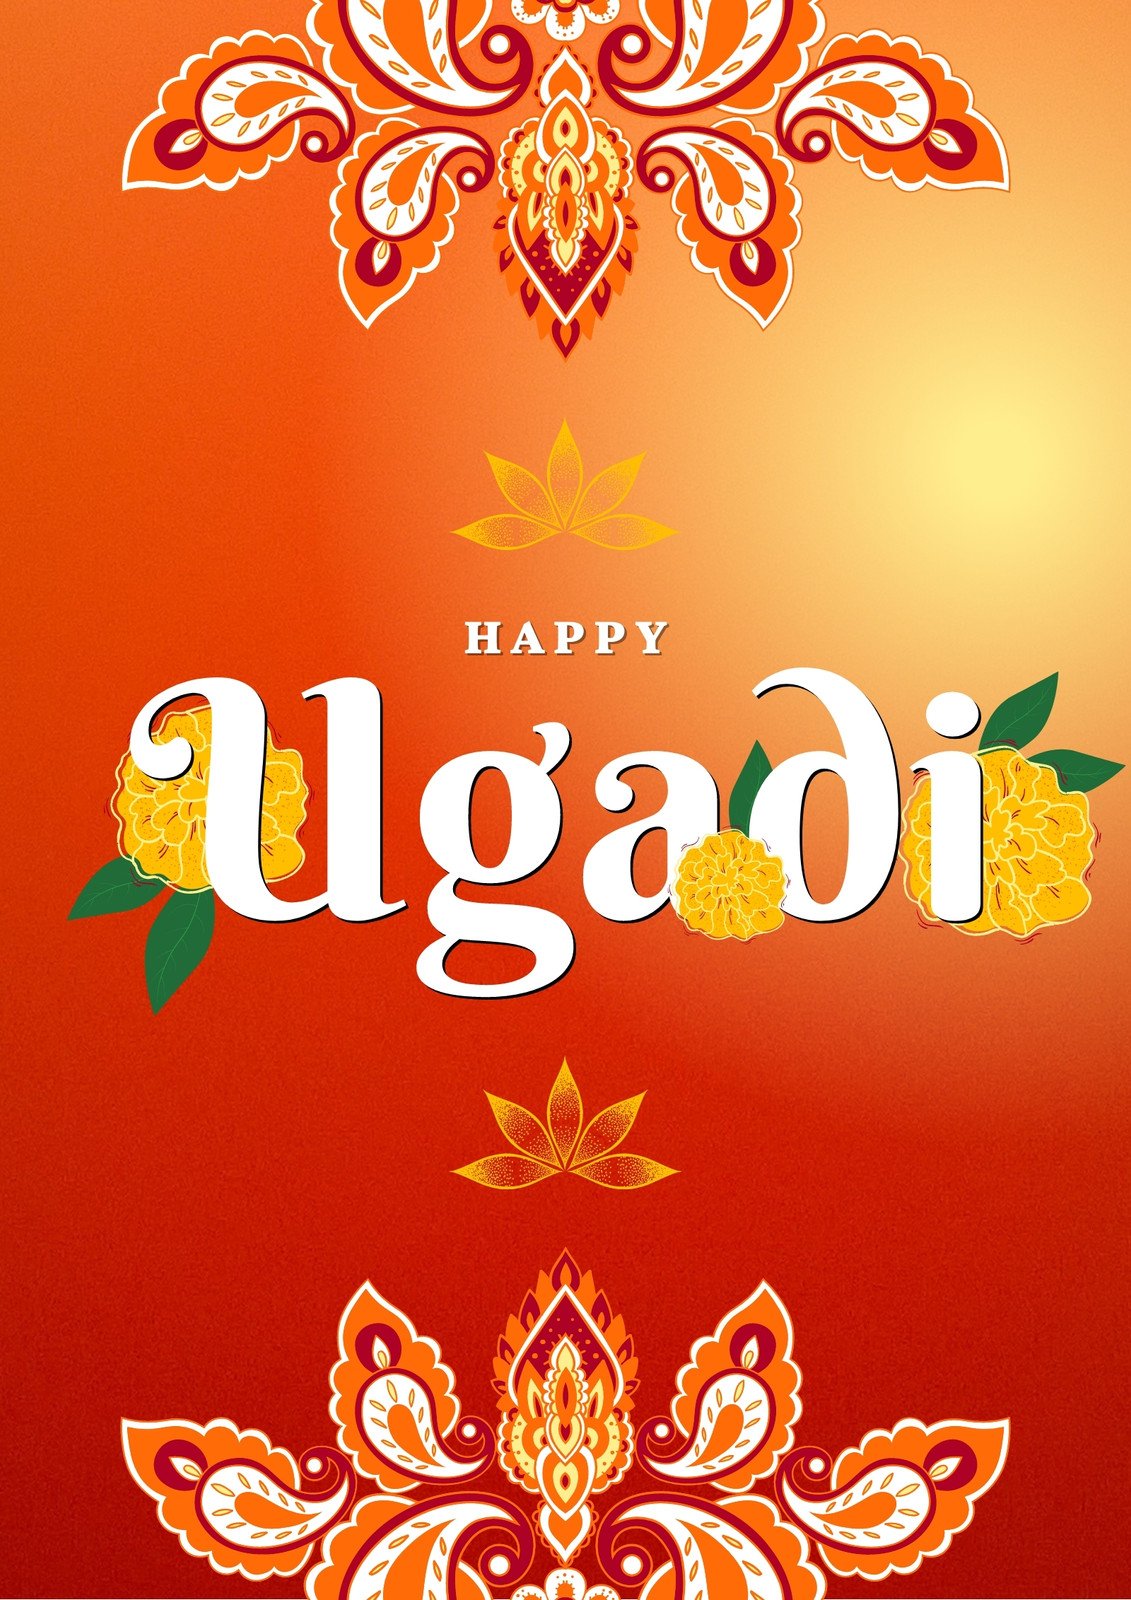 Ugadi Elements PNG Transparent, Transparent Label Element Happy Ugadi,  Happy, Ugadi, Festival PNG Image For Free Download | Transparent labels,  Happy birthday gifts, Birthday gift labels